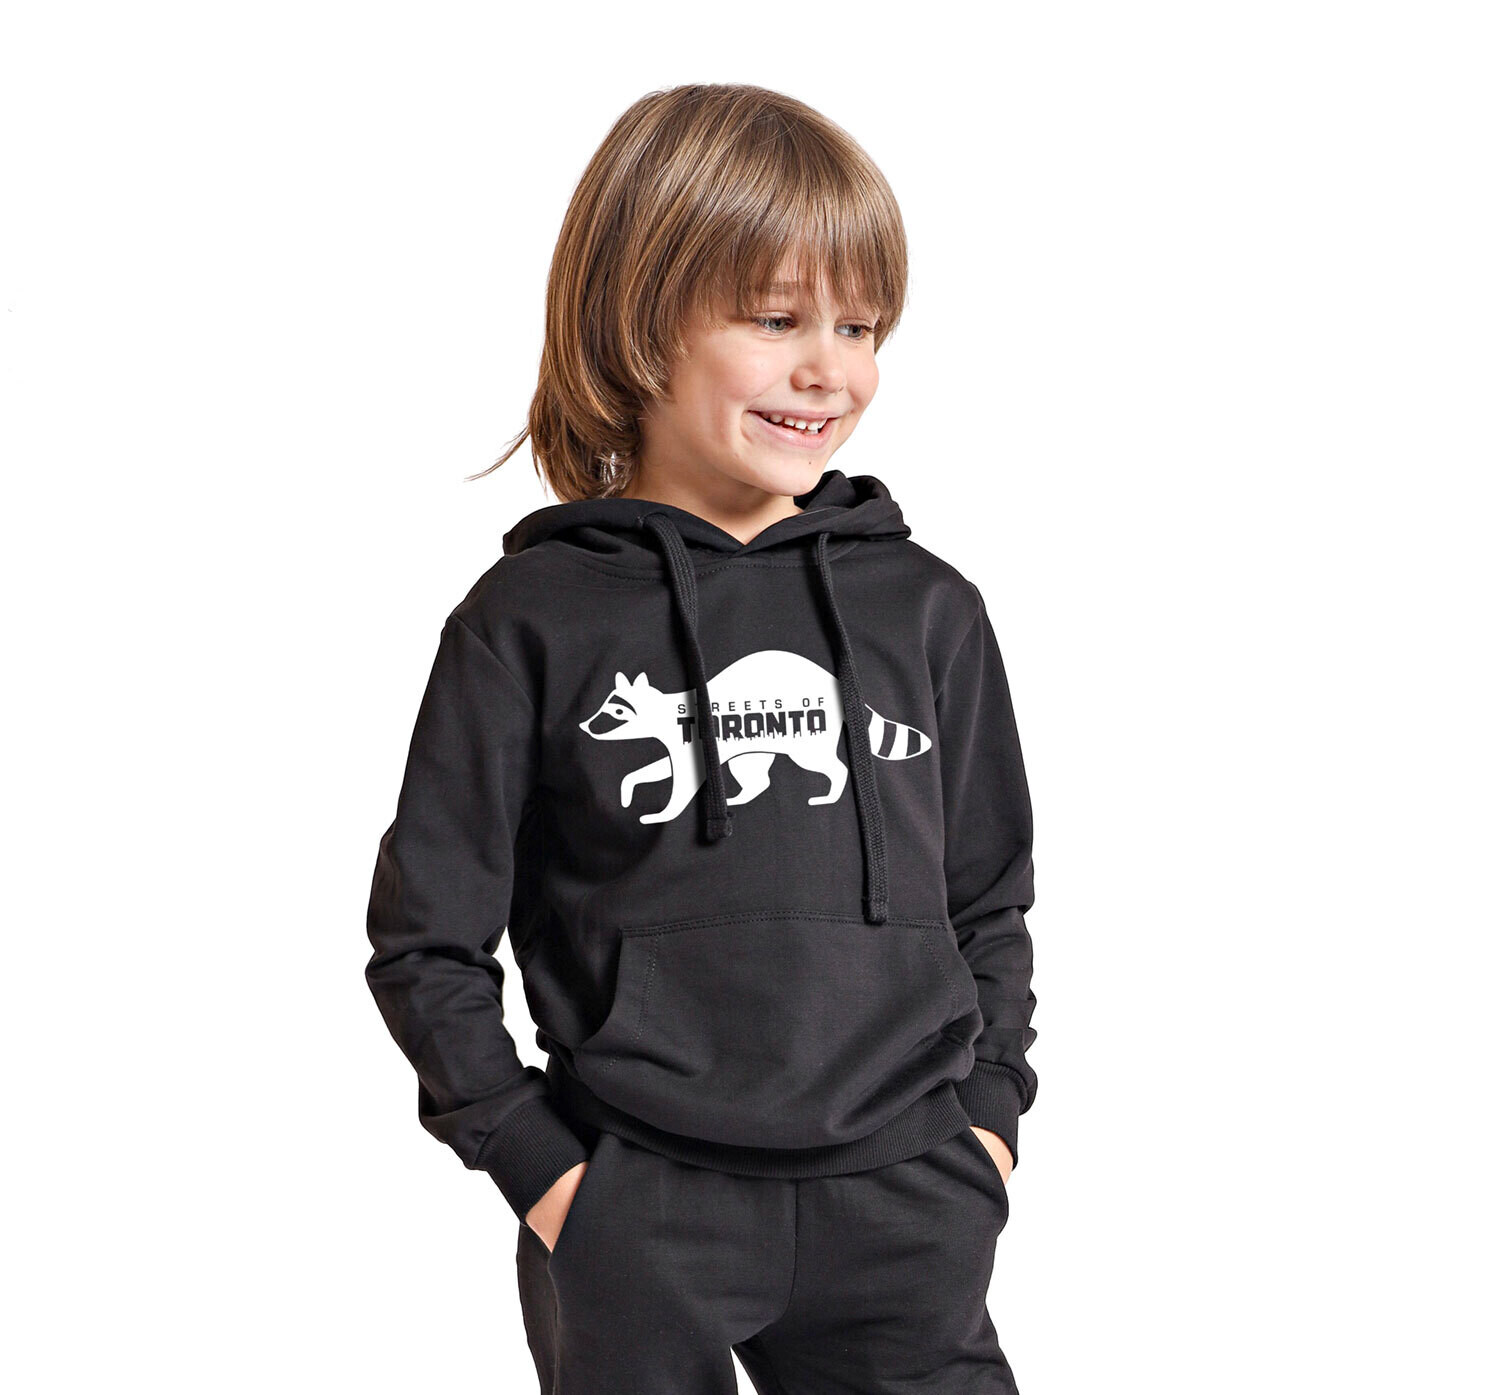 The SOT Classic Youth Sweatsuit